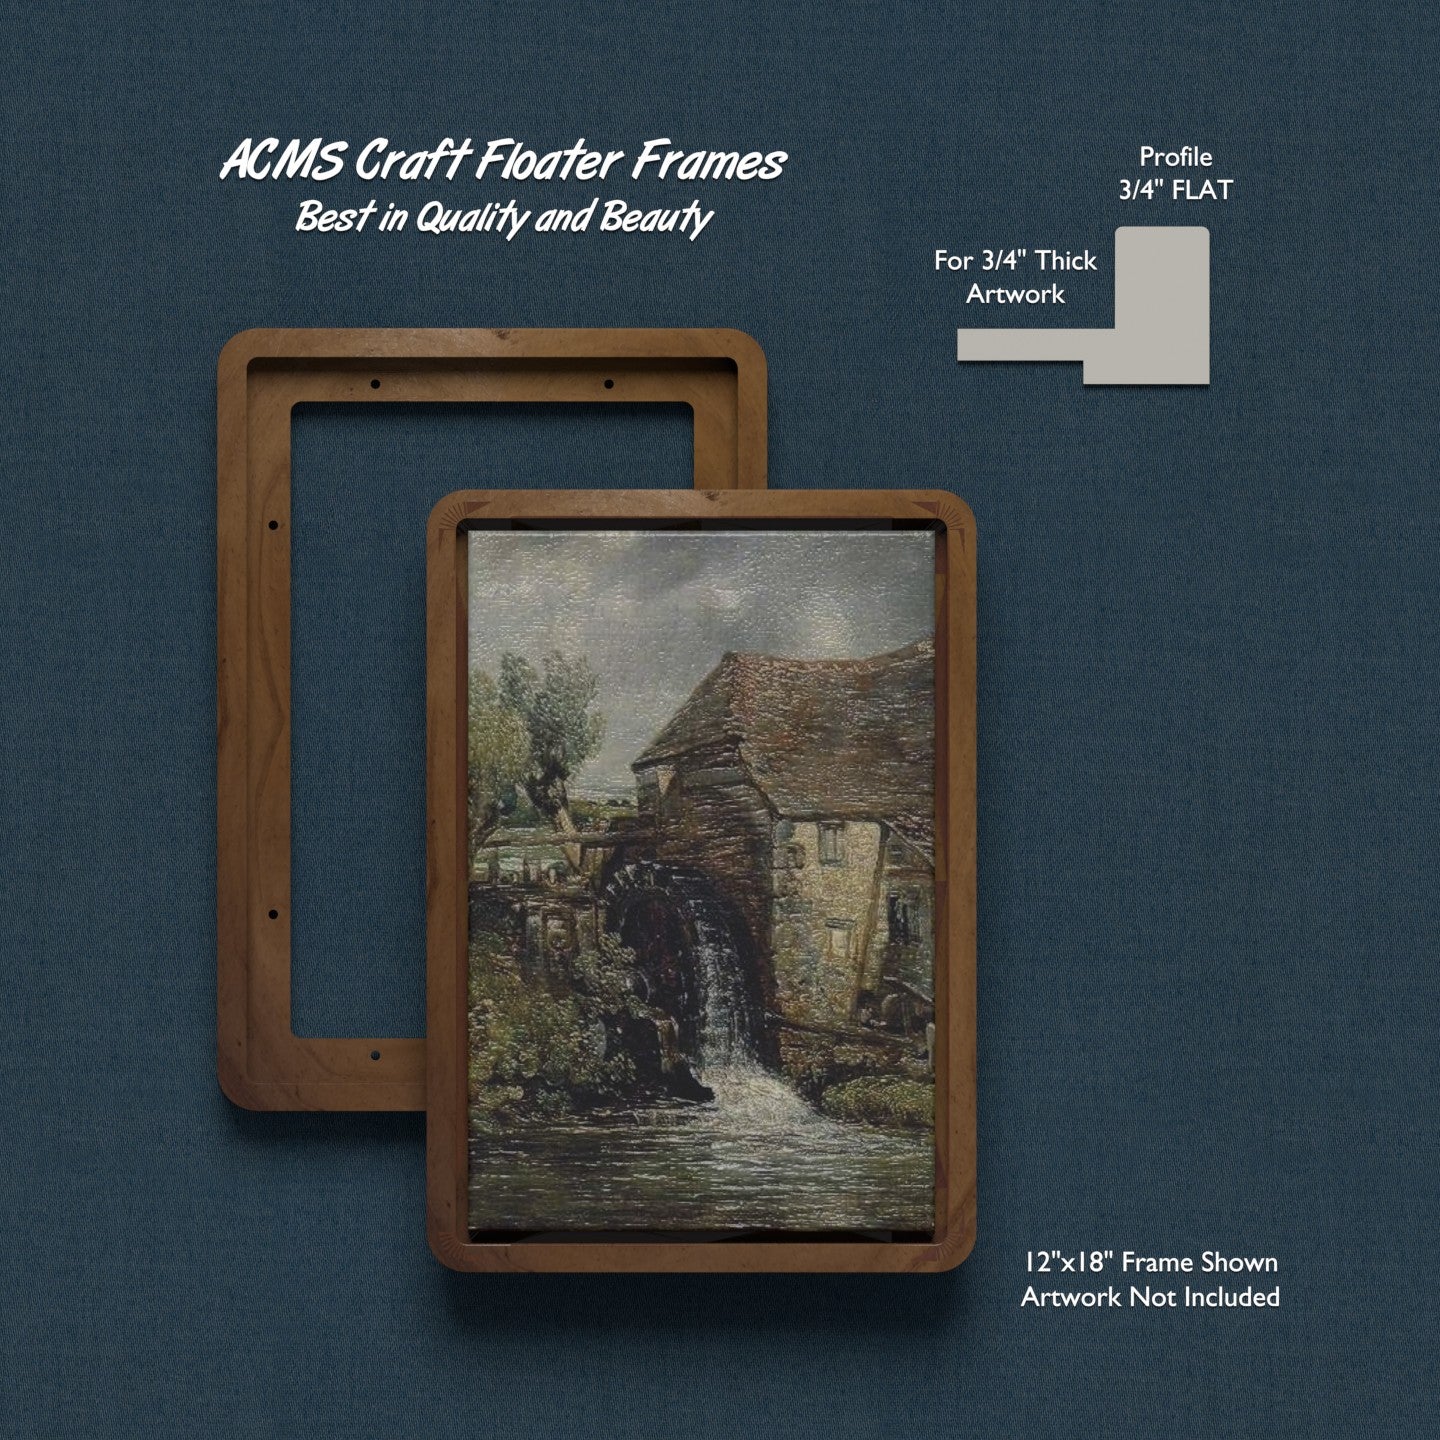 ACMS Soft Rectangular Craft Floater Frame - For 3/4" Thick Artwork - Profile 3/4" FLAT - 1 1/4" Thick Frame